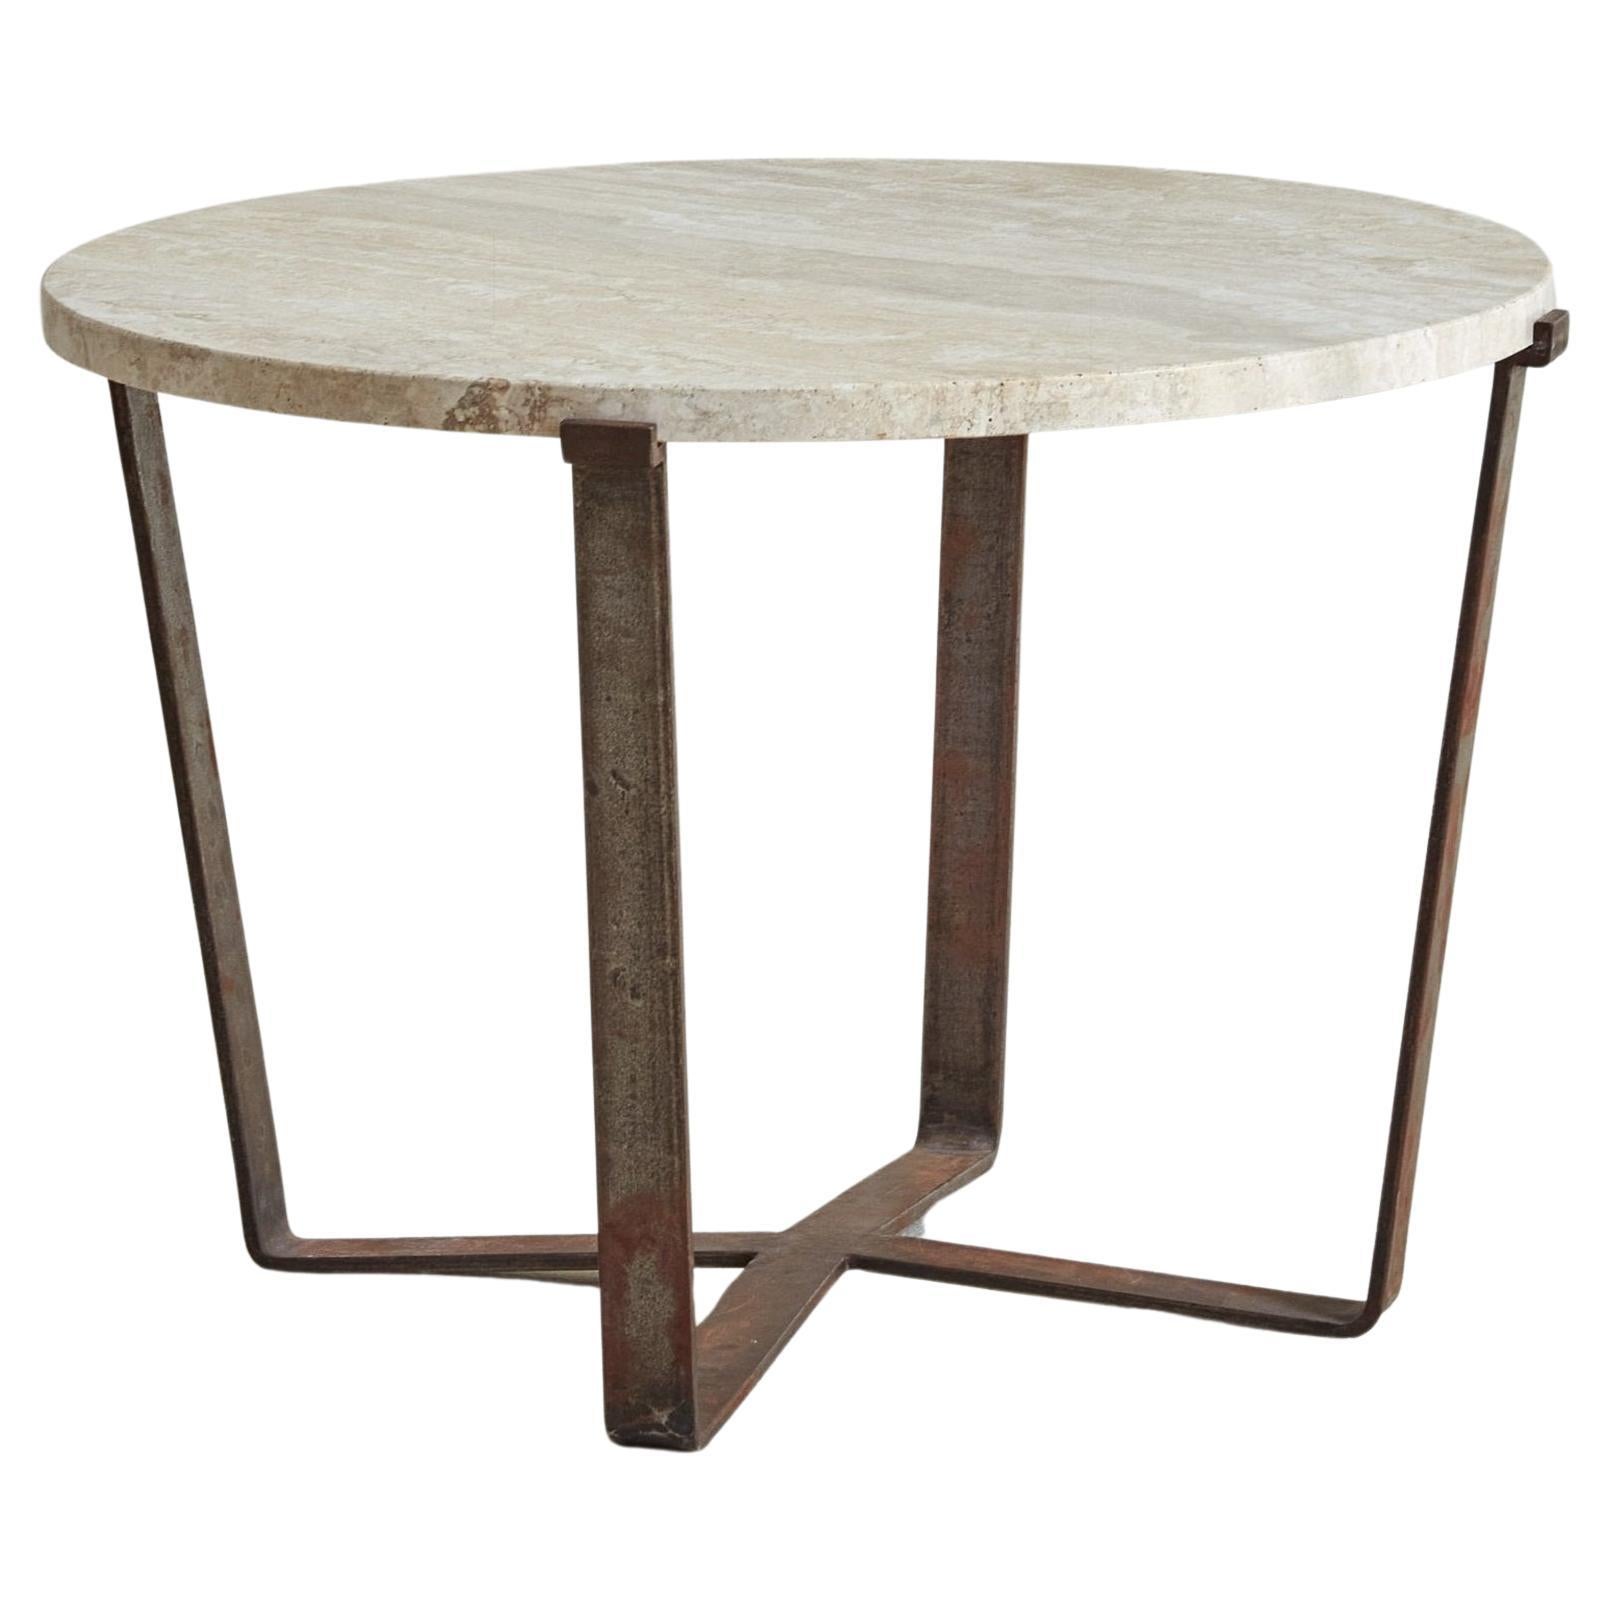 Modernist Travertine Occasional Table, France 1940s